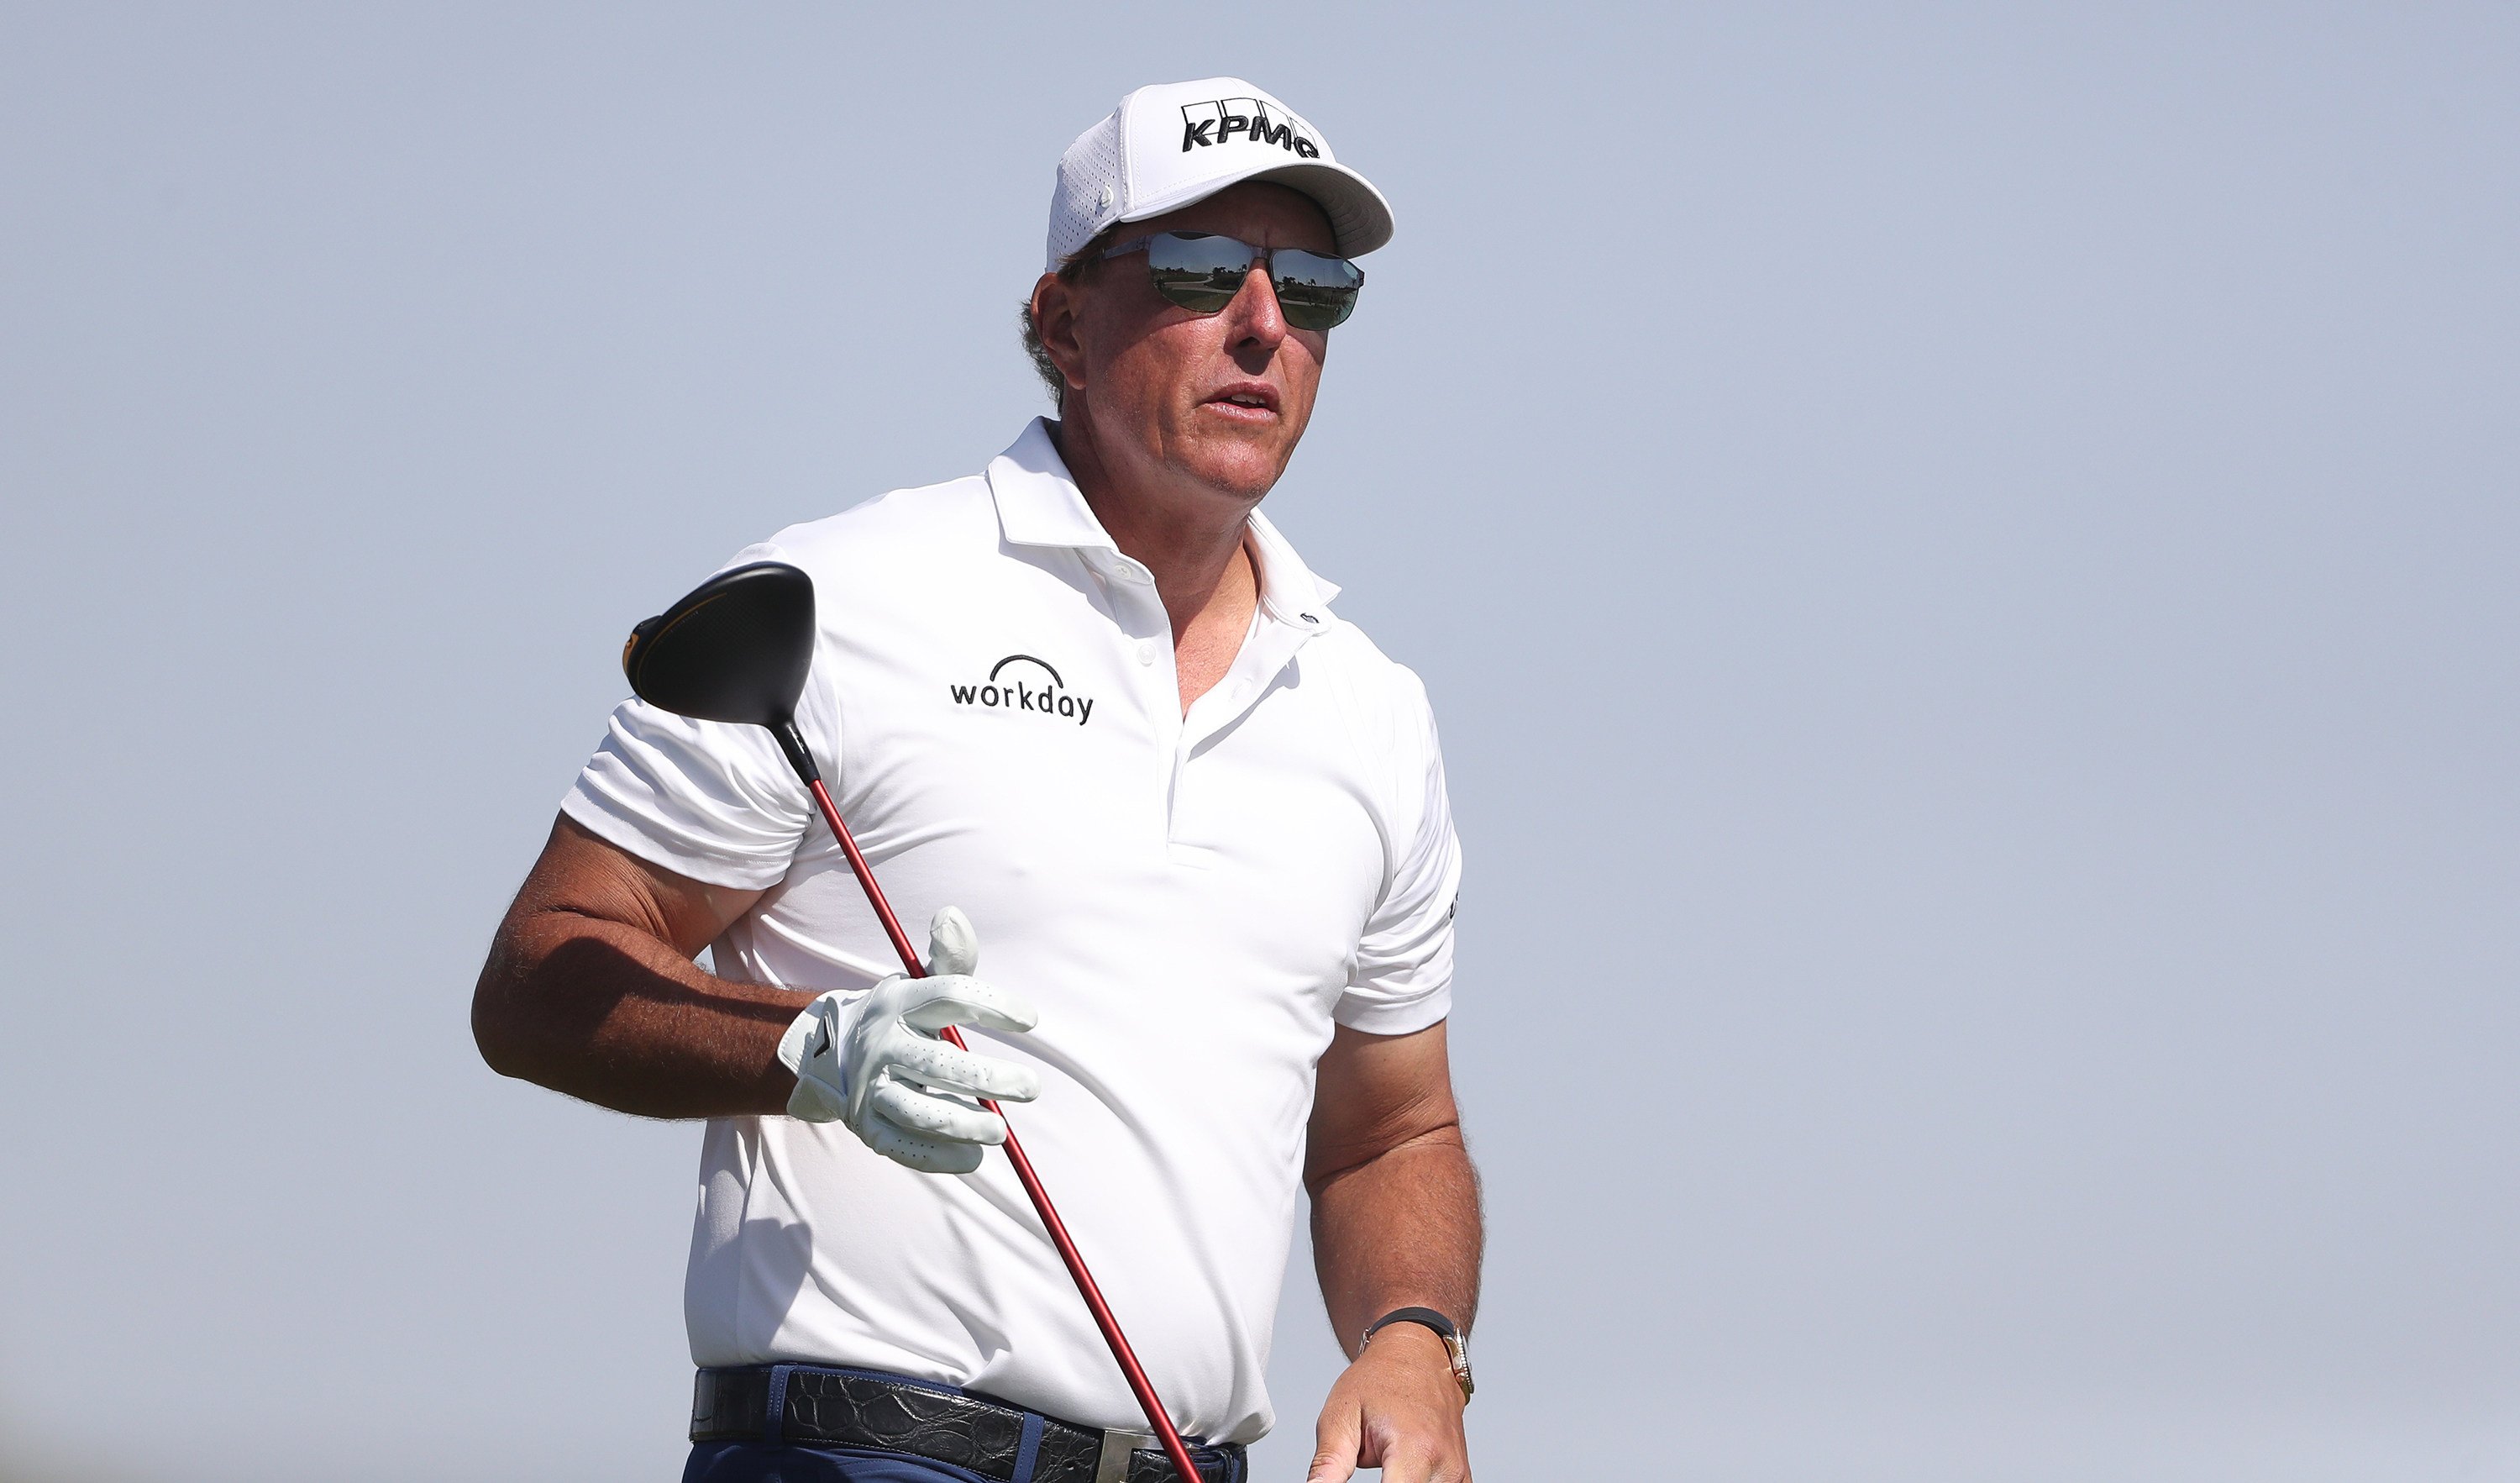 Phil Mickelson has opted not to defend his PGA Championship crown. Photo: TNS